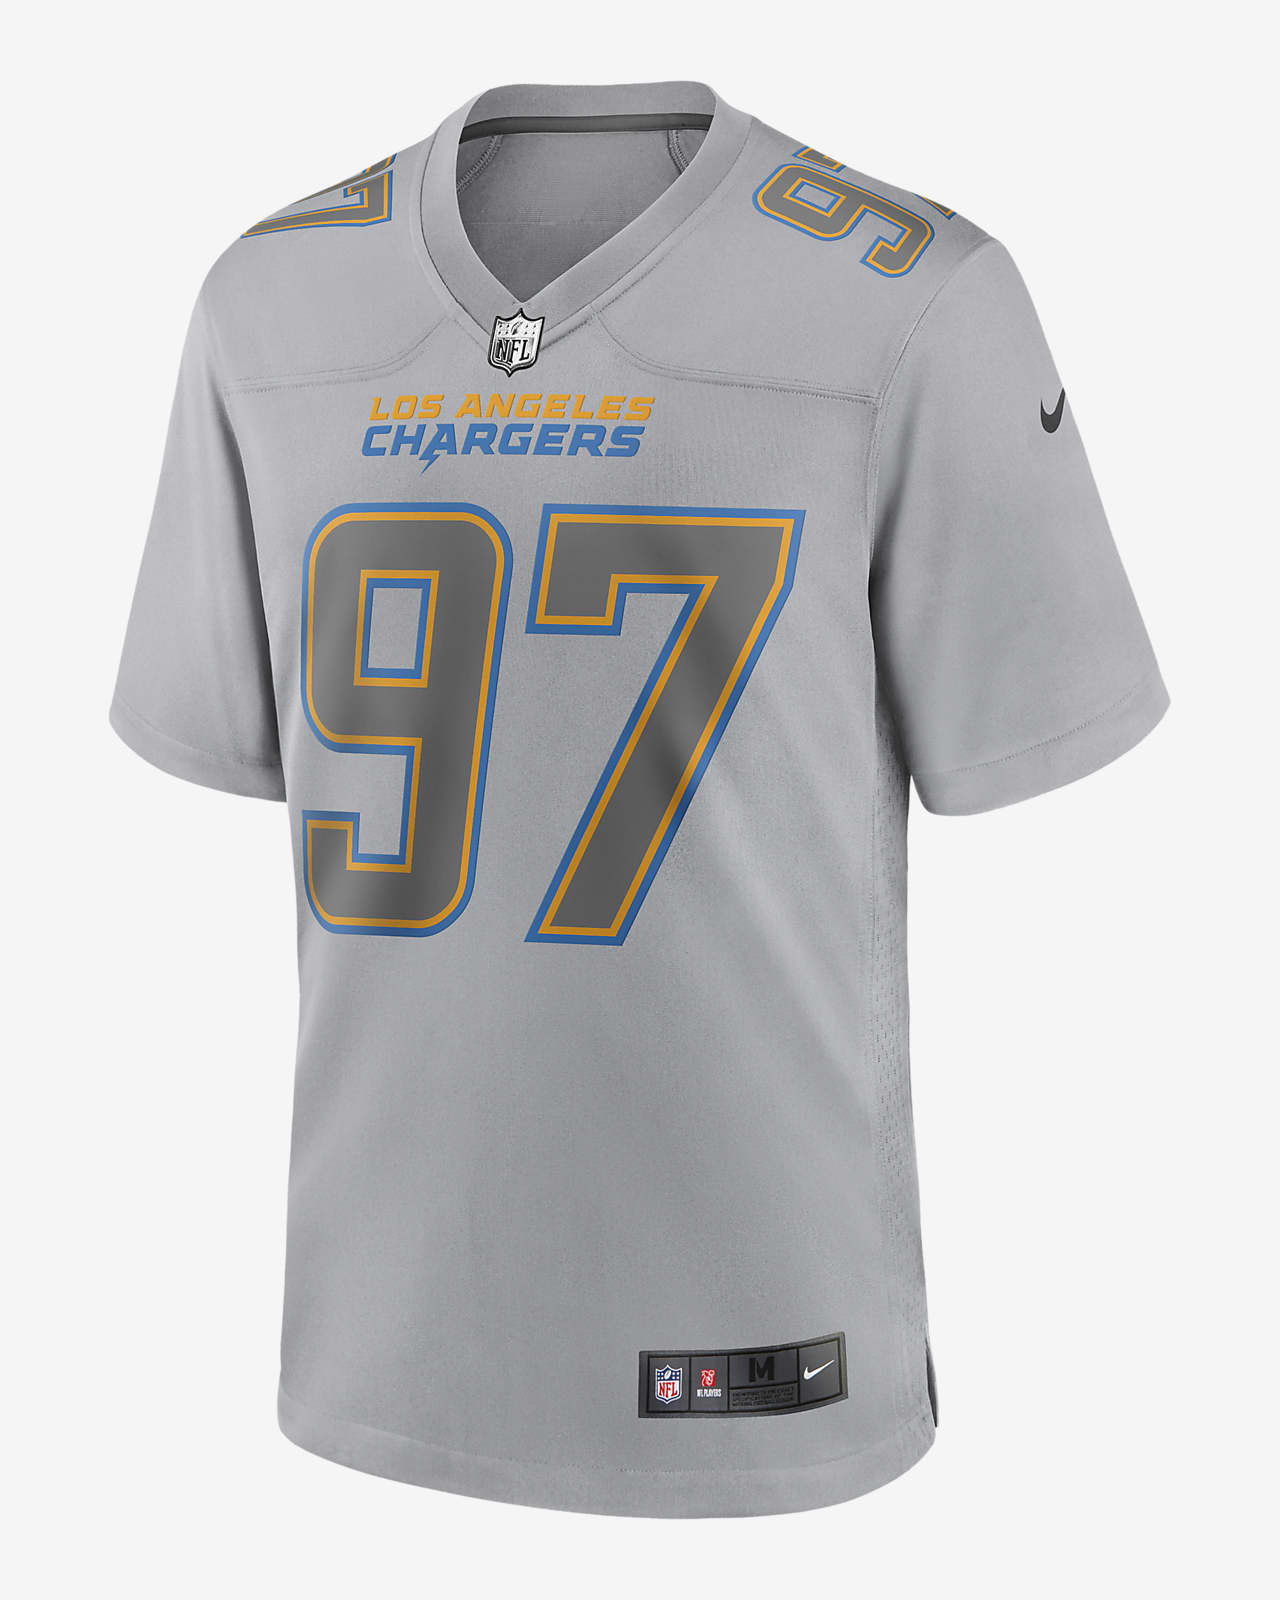 NFL Los Angeles Chargers Atmosphere (Joey Bosa) Men's Fashion Football Jersey